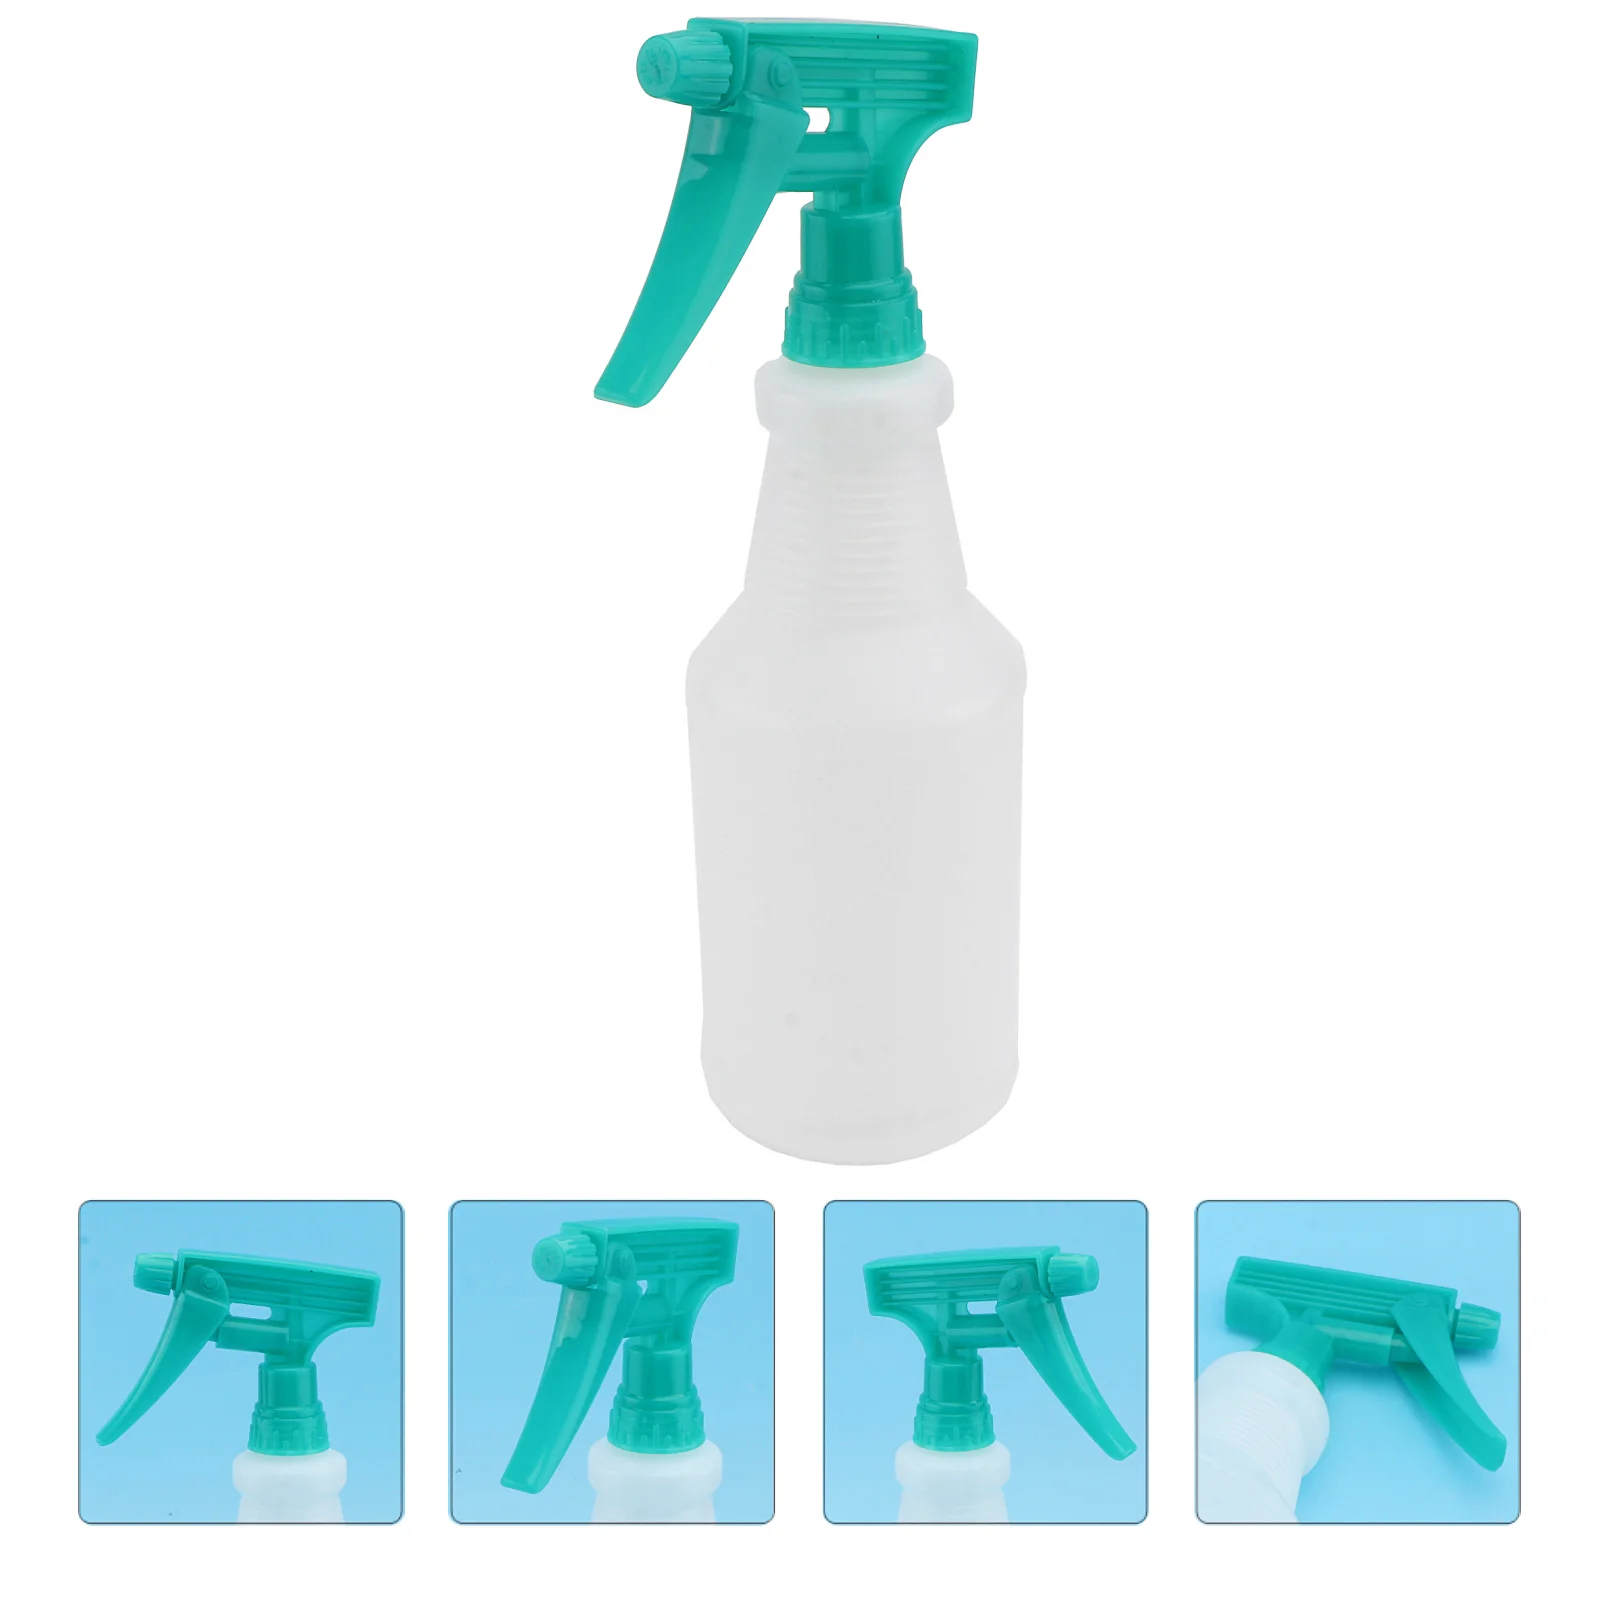 

Bottle Spray Water Watering Squirt Empty Travel Refillable Can Container Reffible 500Ml Bleach Vinegar Bbq Rubbing Spay Handheld